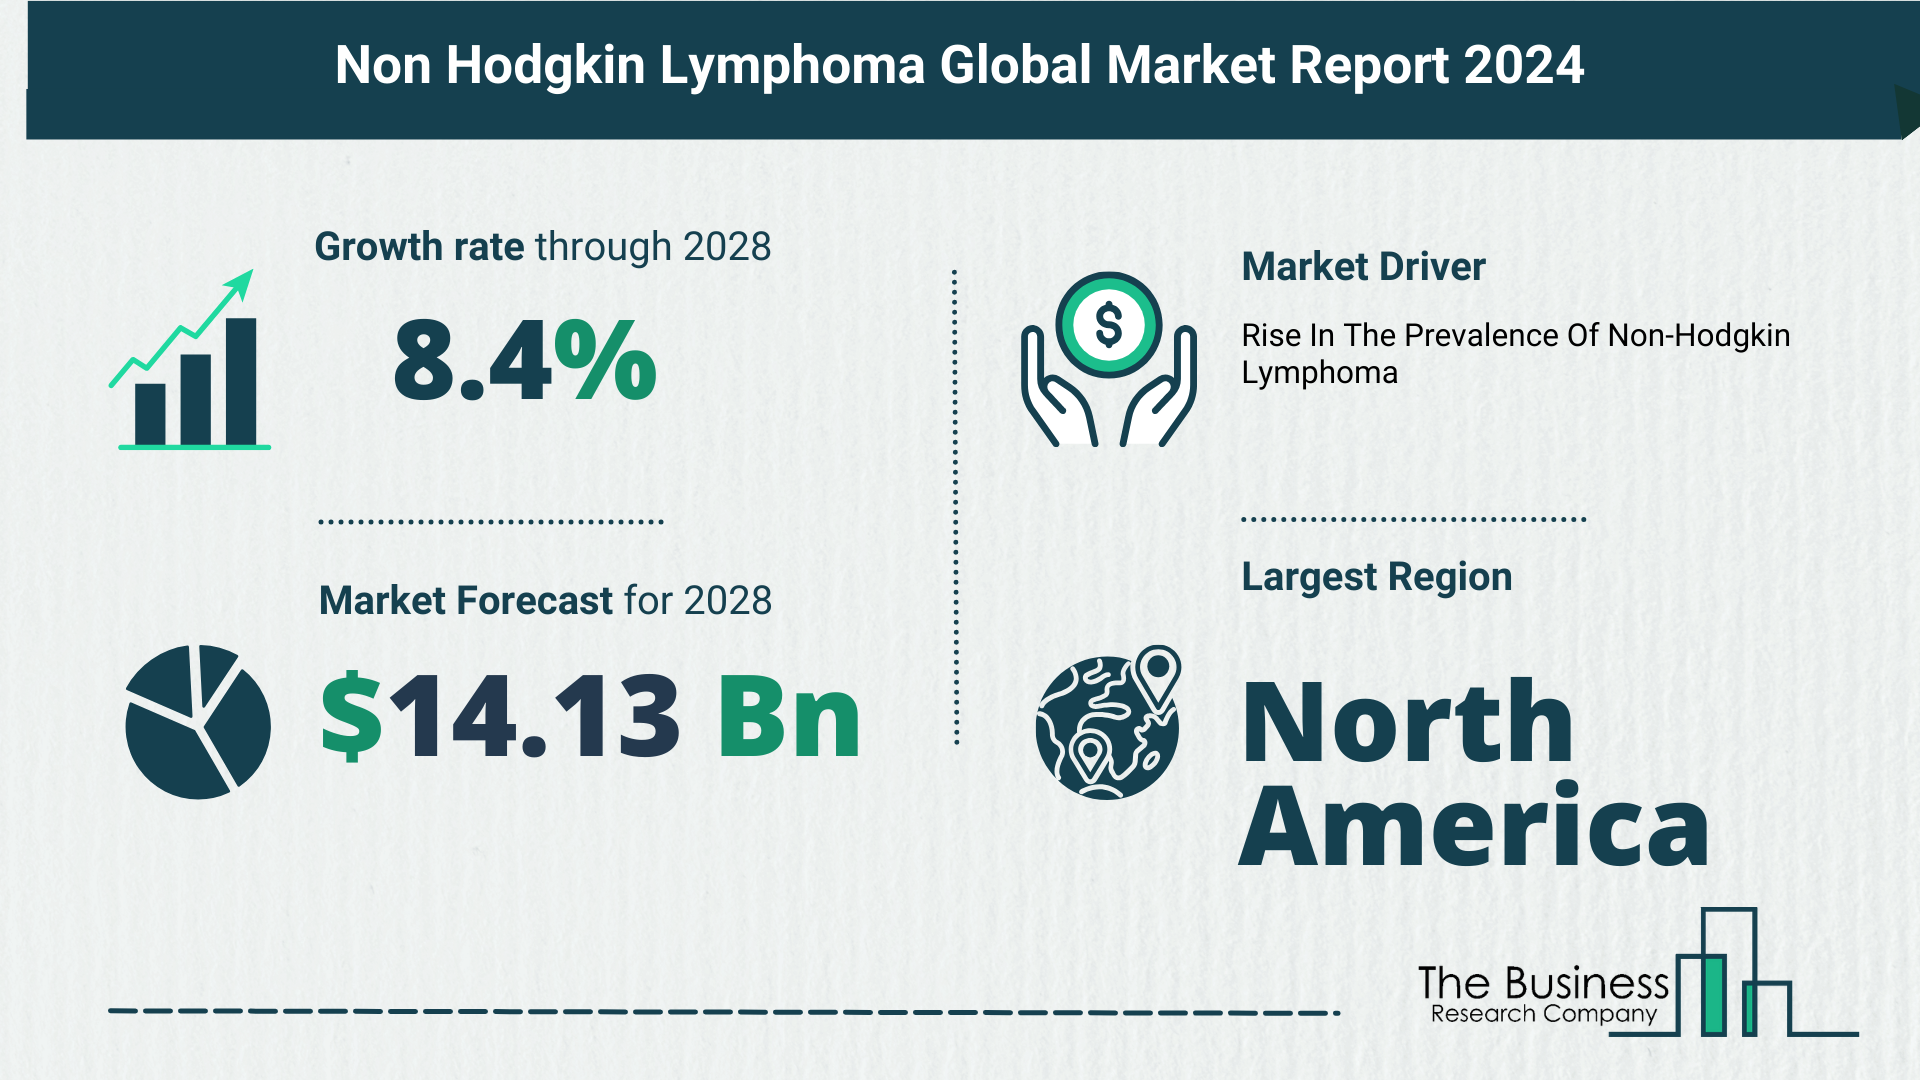 Global Non Hodgkin Lymphoma (NHL) Market Analysis 2024: Size, Share, And Key Trends